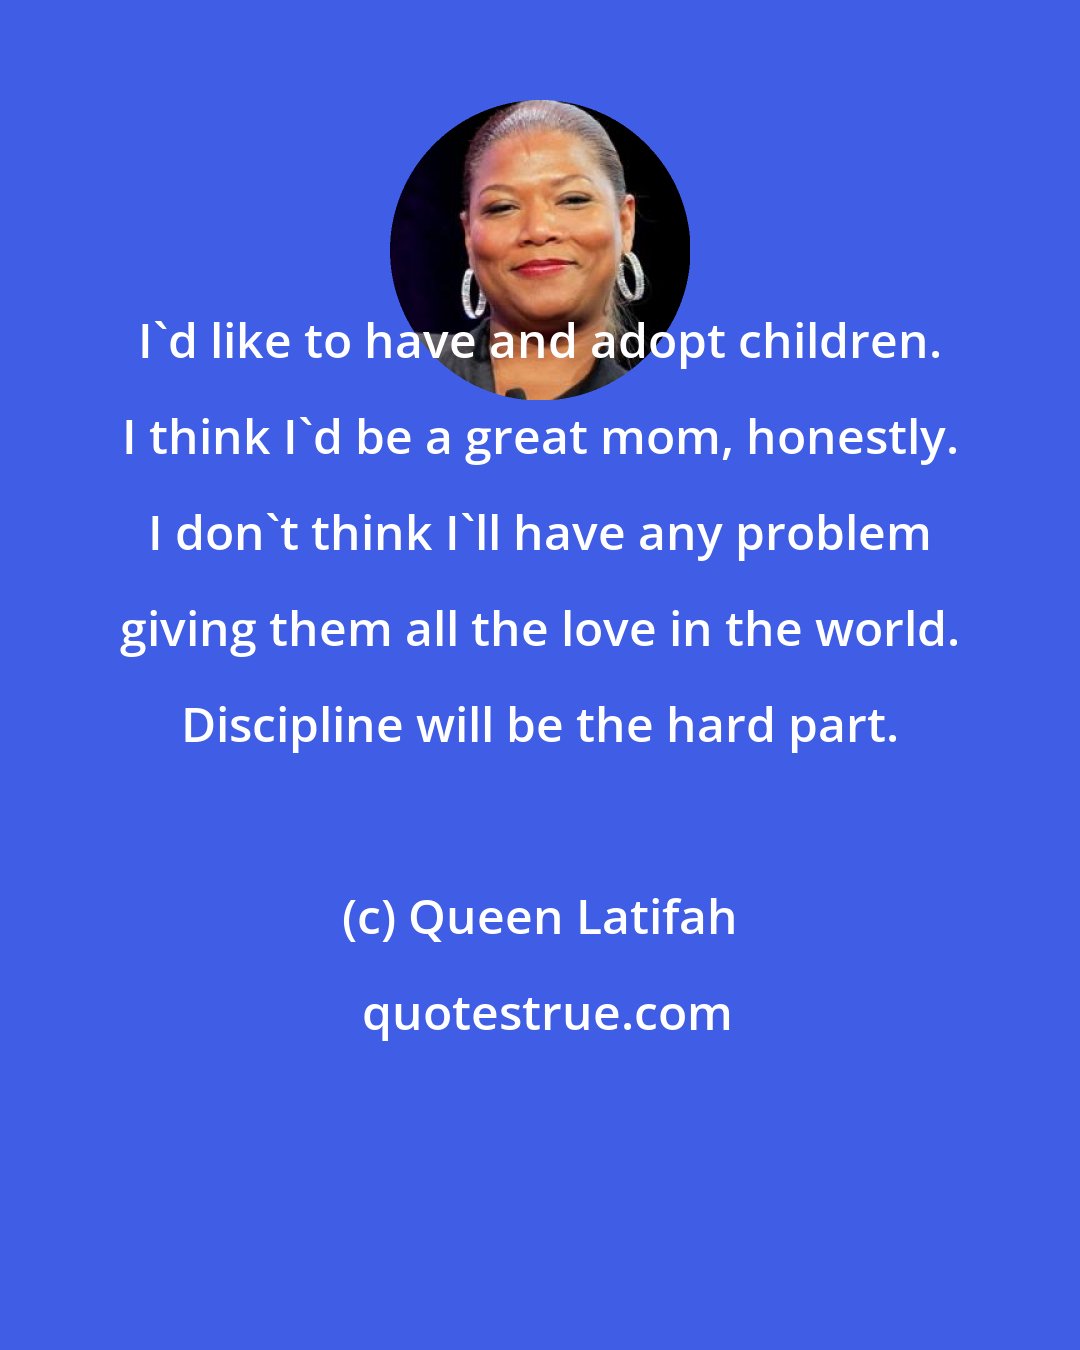 Queen Latifah: I'd like to have and adopt children. I think I'd be a great mom, honestly. I don't think I'll have any problem giving them all the love in the world. Discipline will be the hard part.